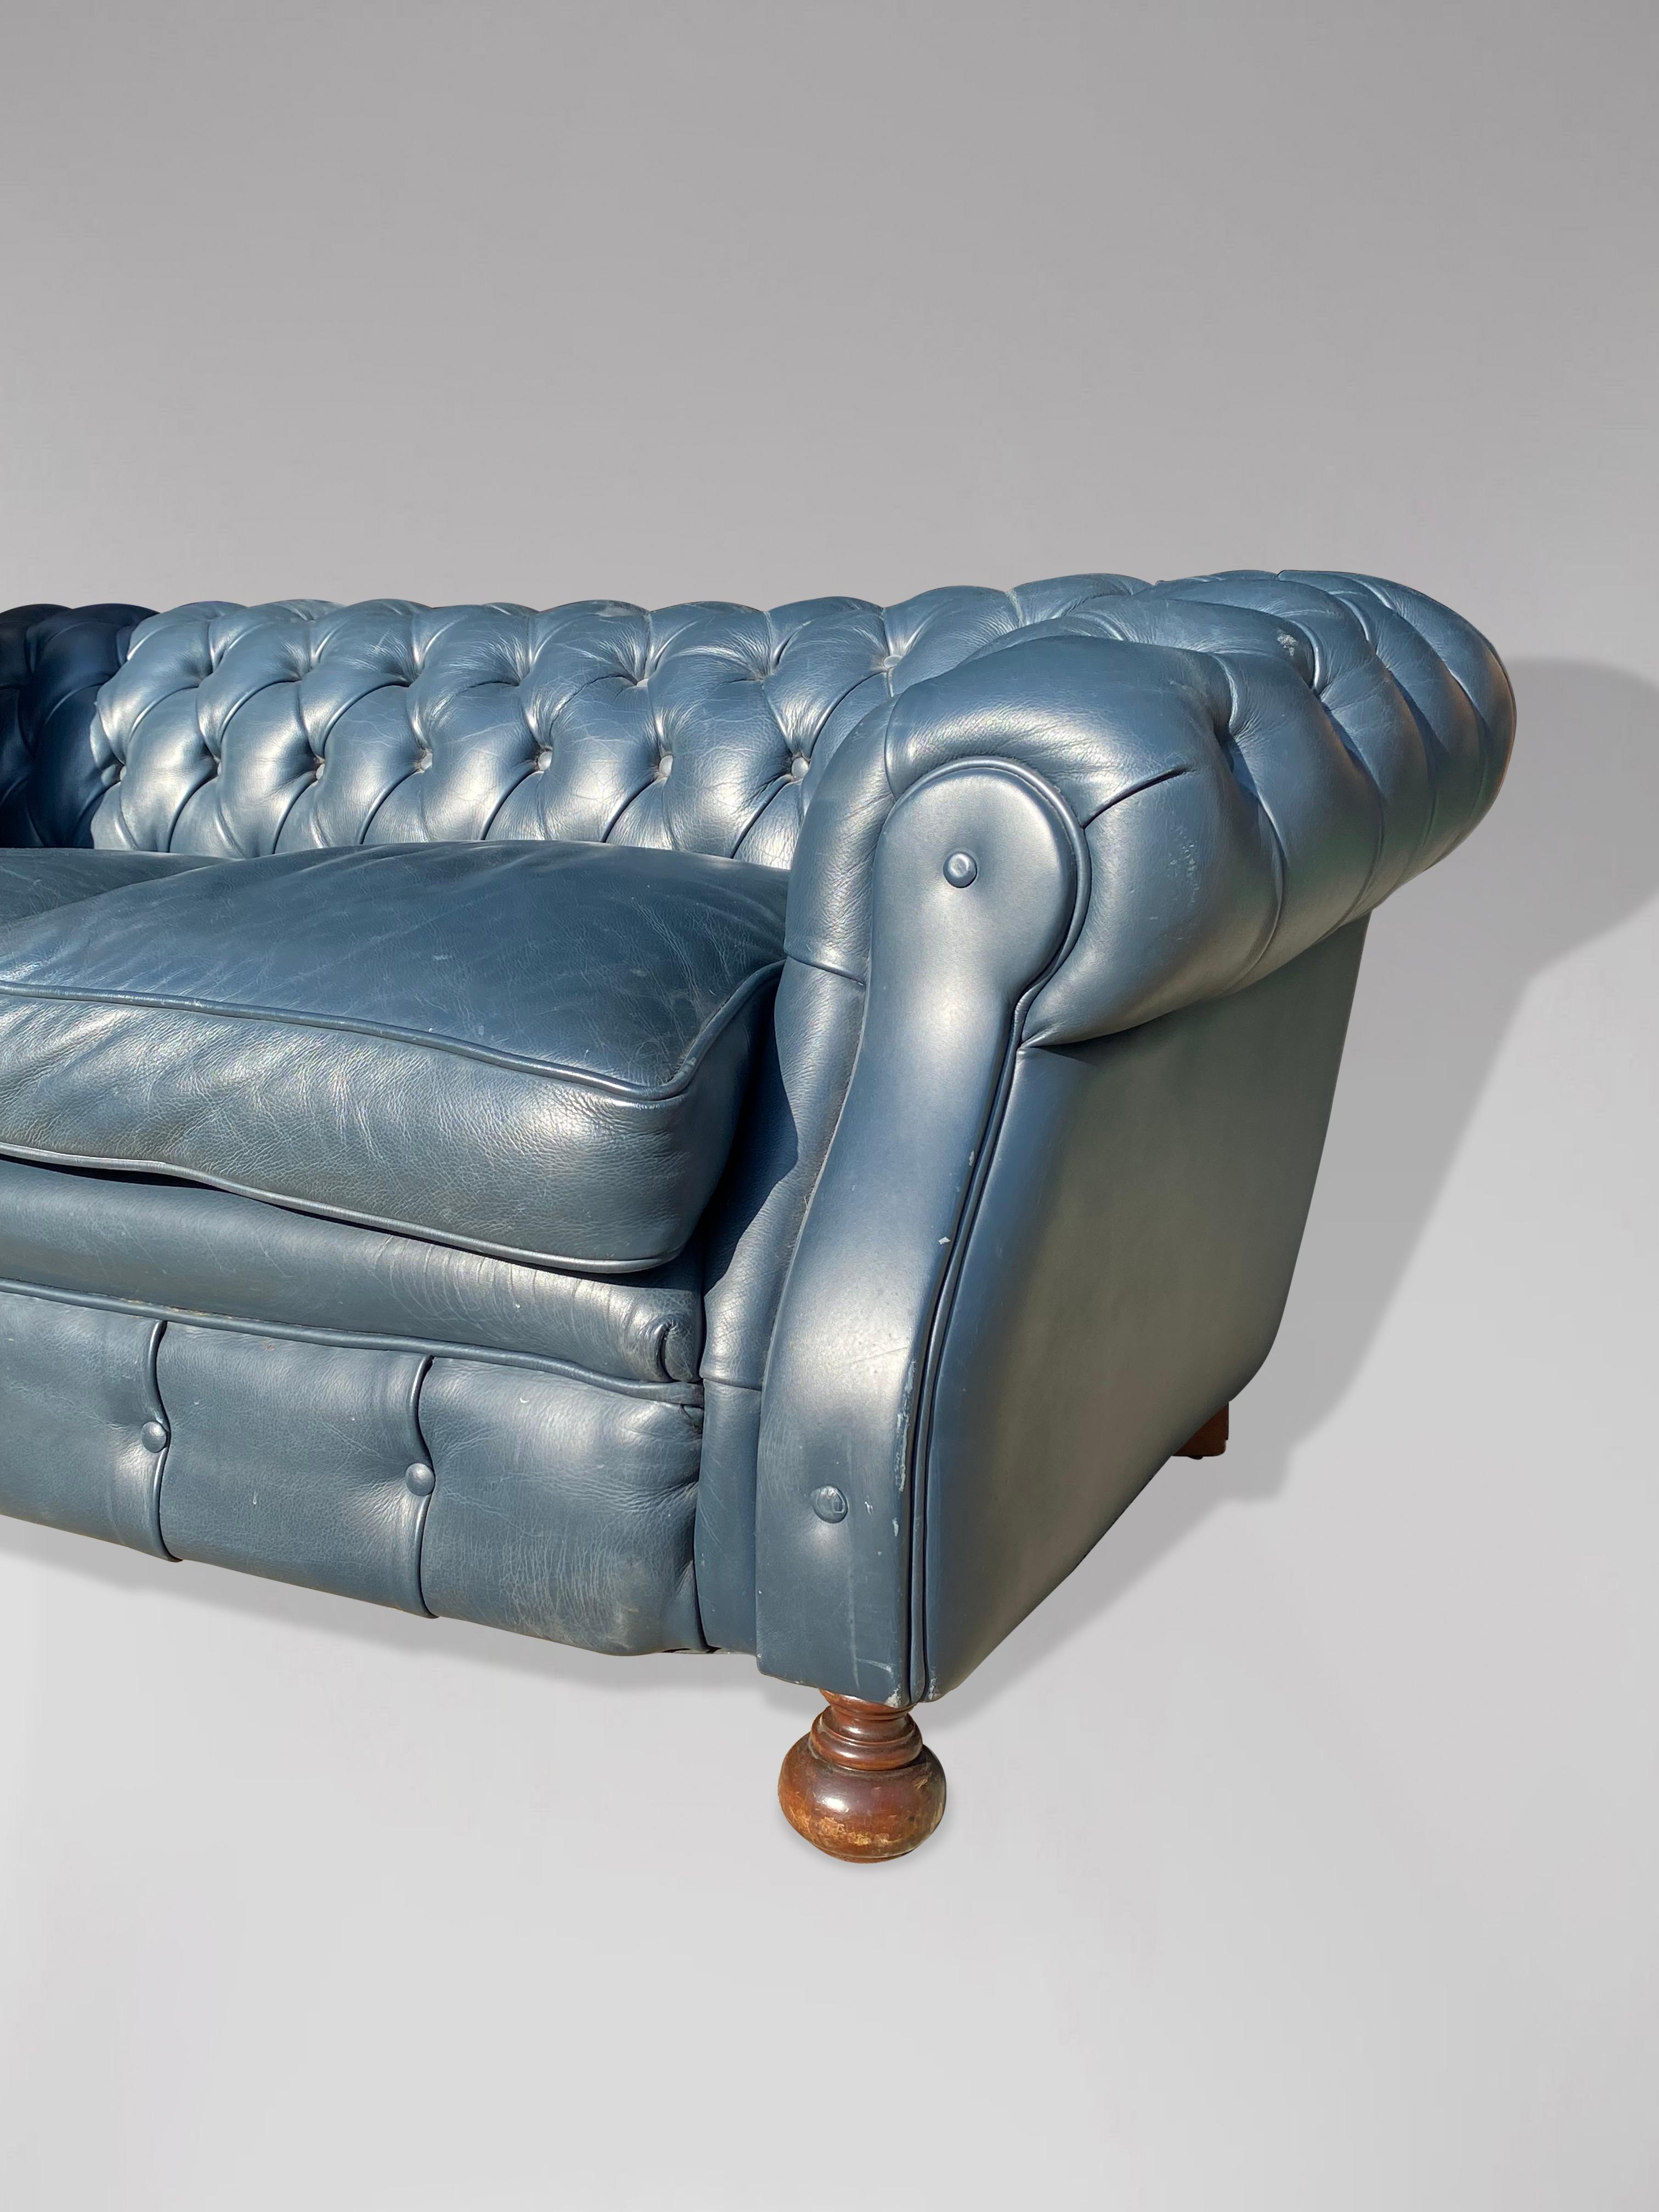 Hand-Crafted 20th Century Stunning Quality Blue Leather 3 Seater Chesterfield Sofa